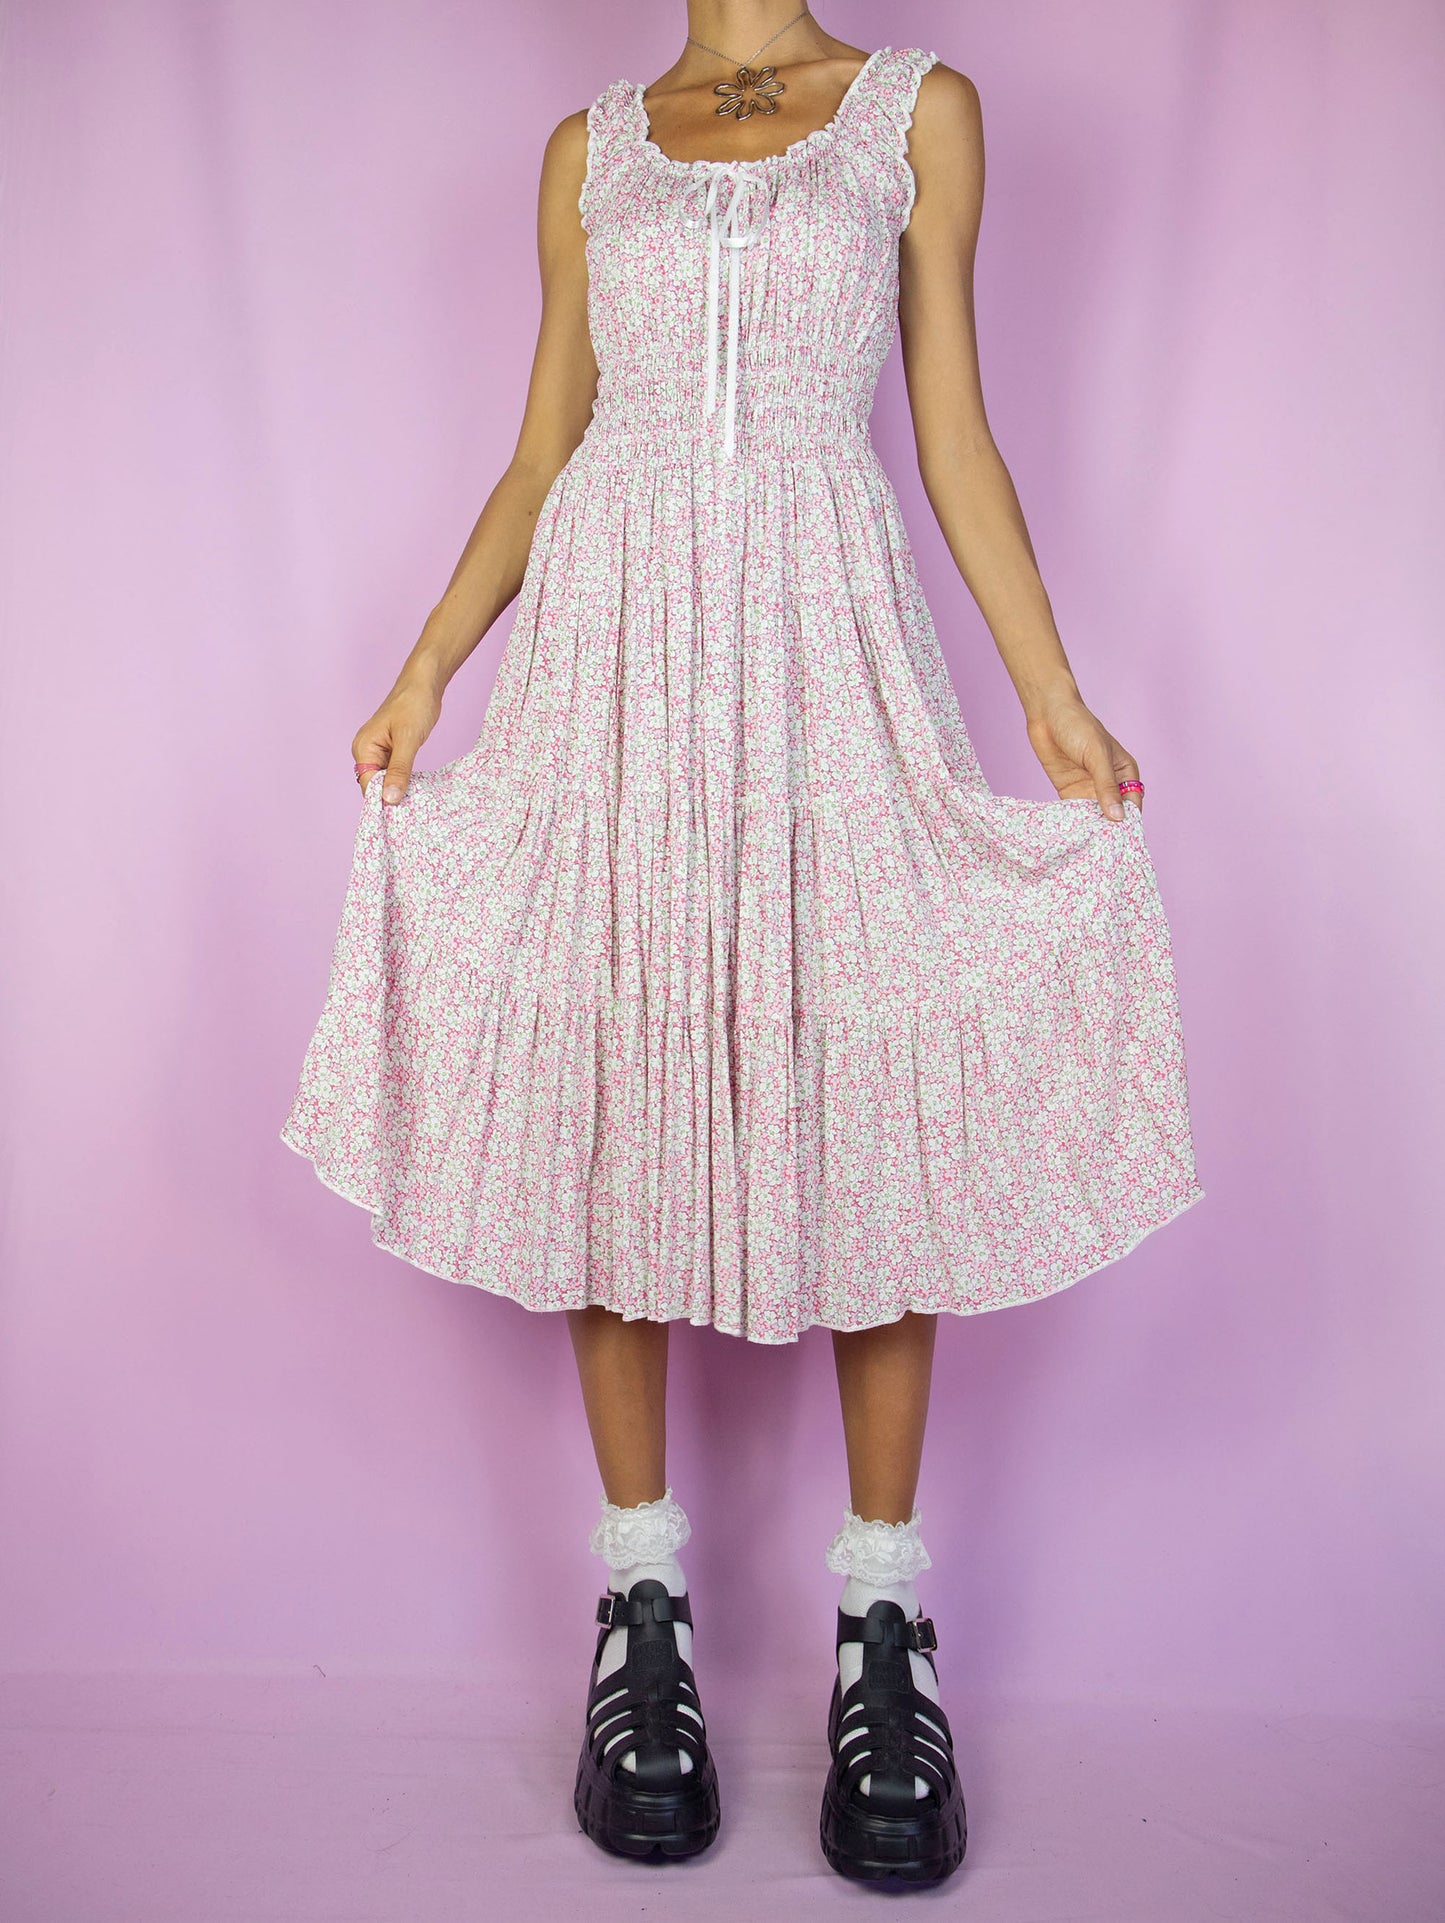 The Y2K Floral Milkmaid Midi Dress is a vintage multicolored floral pink and white sleeveless dress with tiered layers, ruched waist, and a bow at the front. This super cute cottage prairie-inspired boho summer dress is from the 2000s.